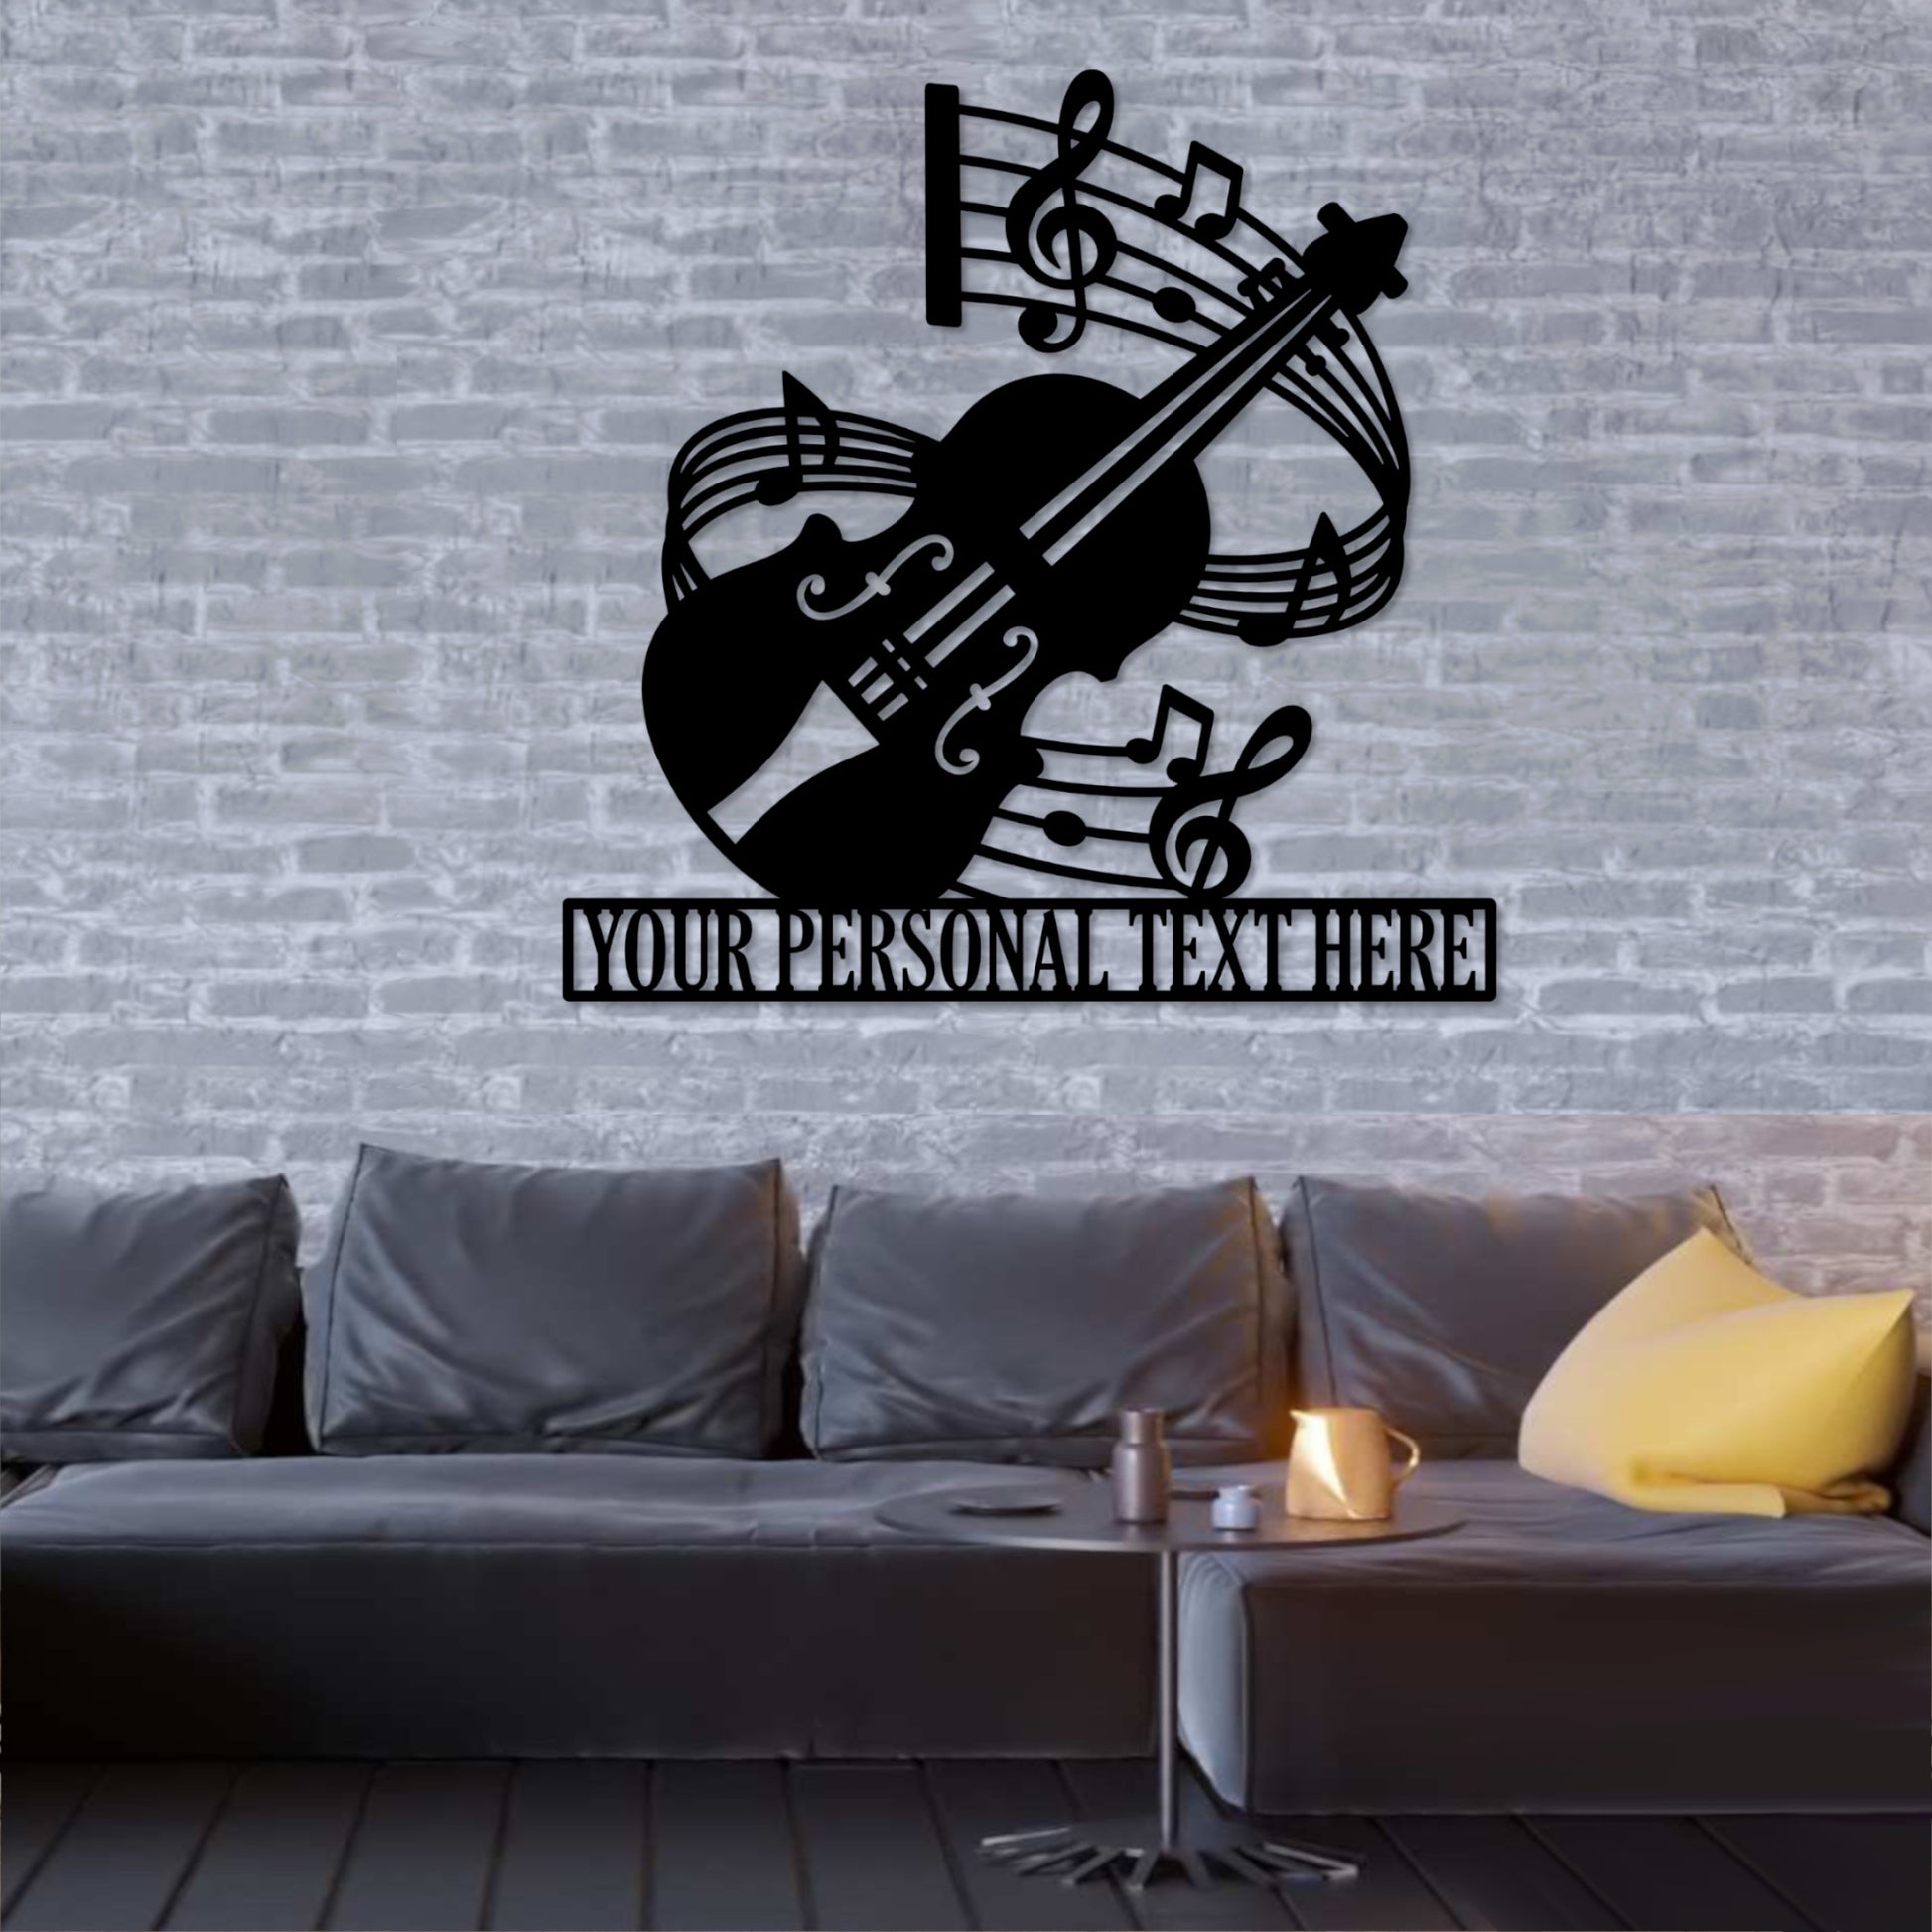 Personalized Cello Name Metal Sign Gift. Custom Music Performer Wall Decor. Music Room Decor. Cello Player Wall Hanging Gifts. Music Lover